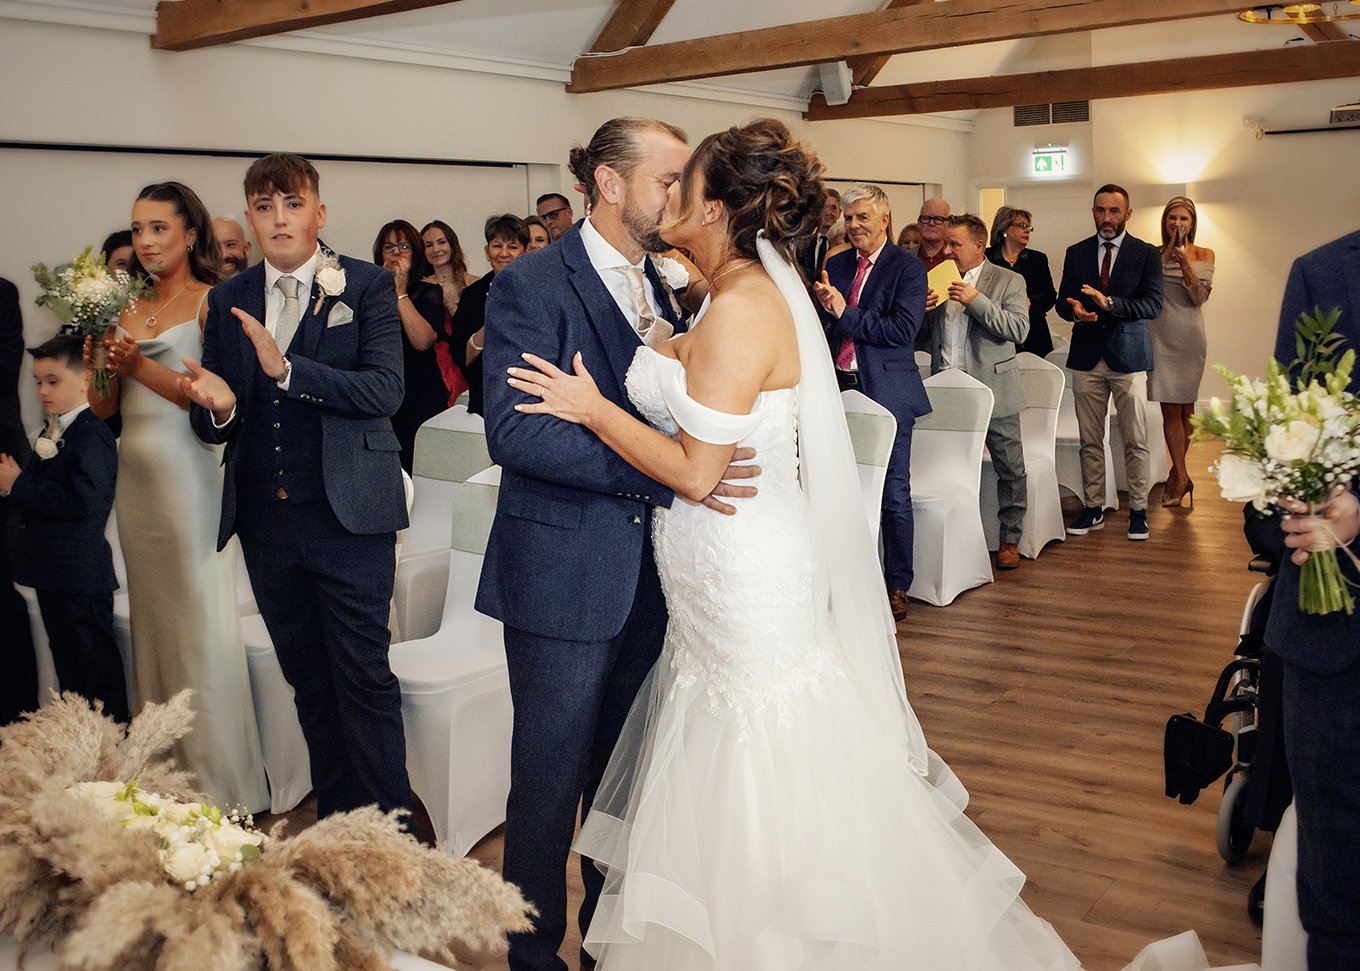 Cottesmore Golf and Country Club - Wedding photography in Crawley, West Sussex &amp; beyond